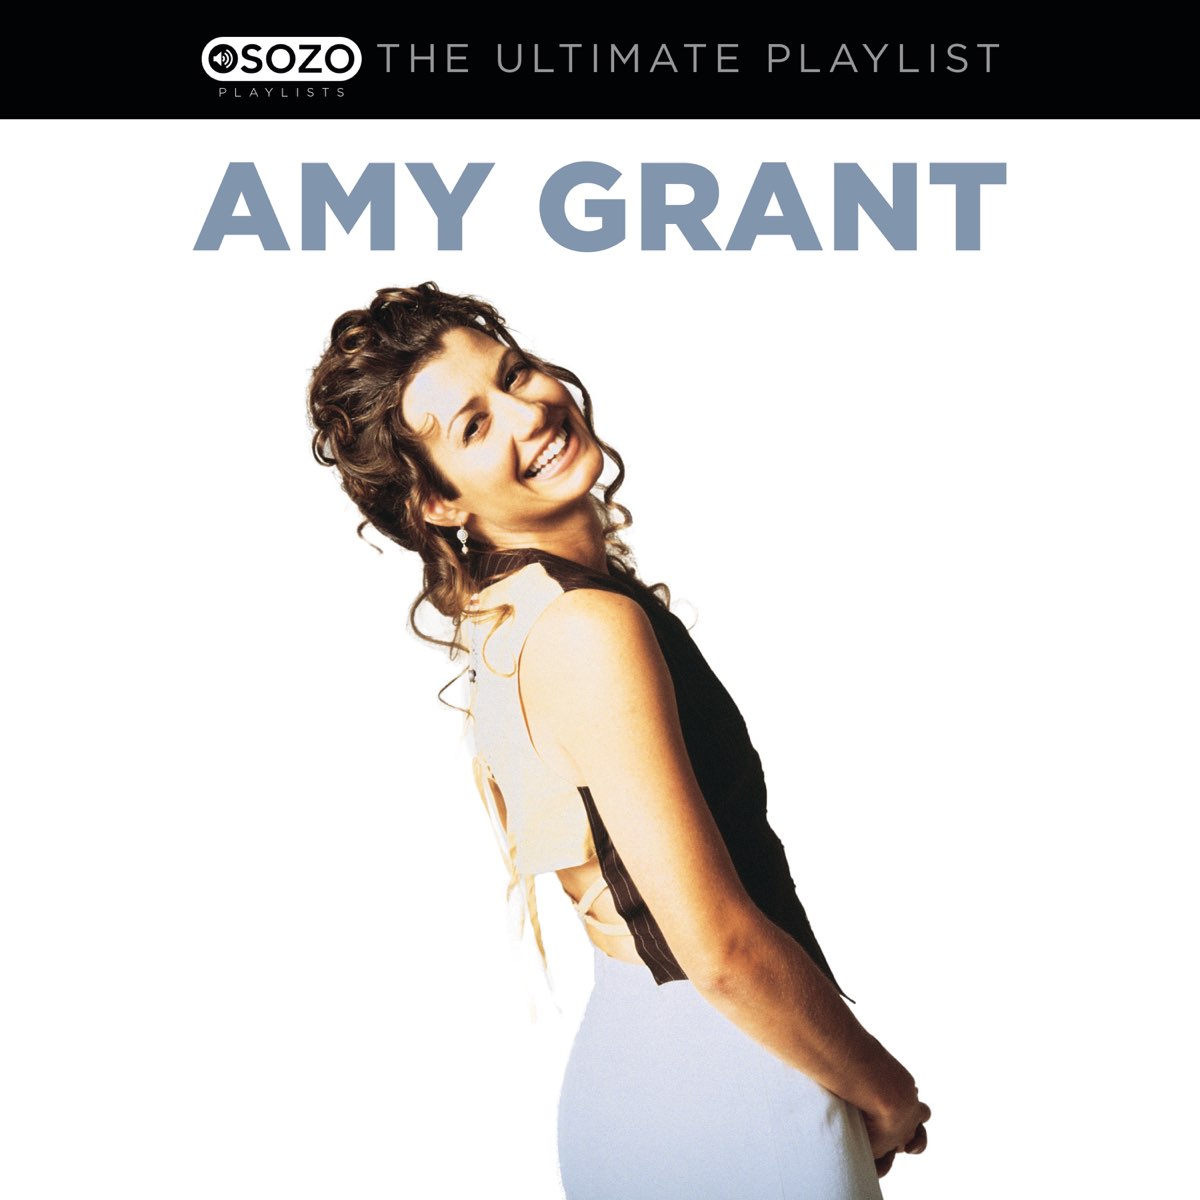 Ultimate playlist. Эми Грант альбомы. I will remember you Эми Грант. Amy Grant every Heartbeat. Amy Grant that's what Love is for.